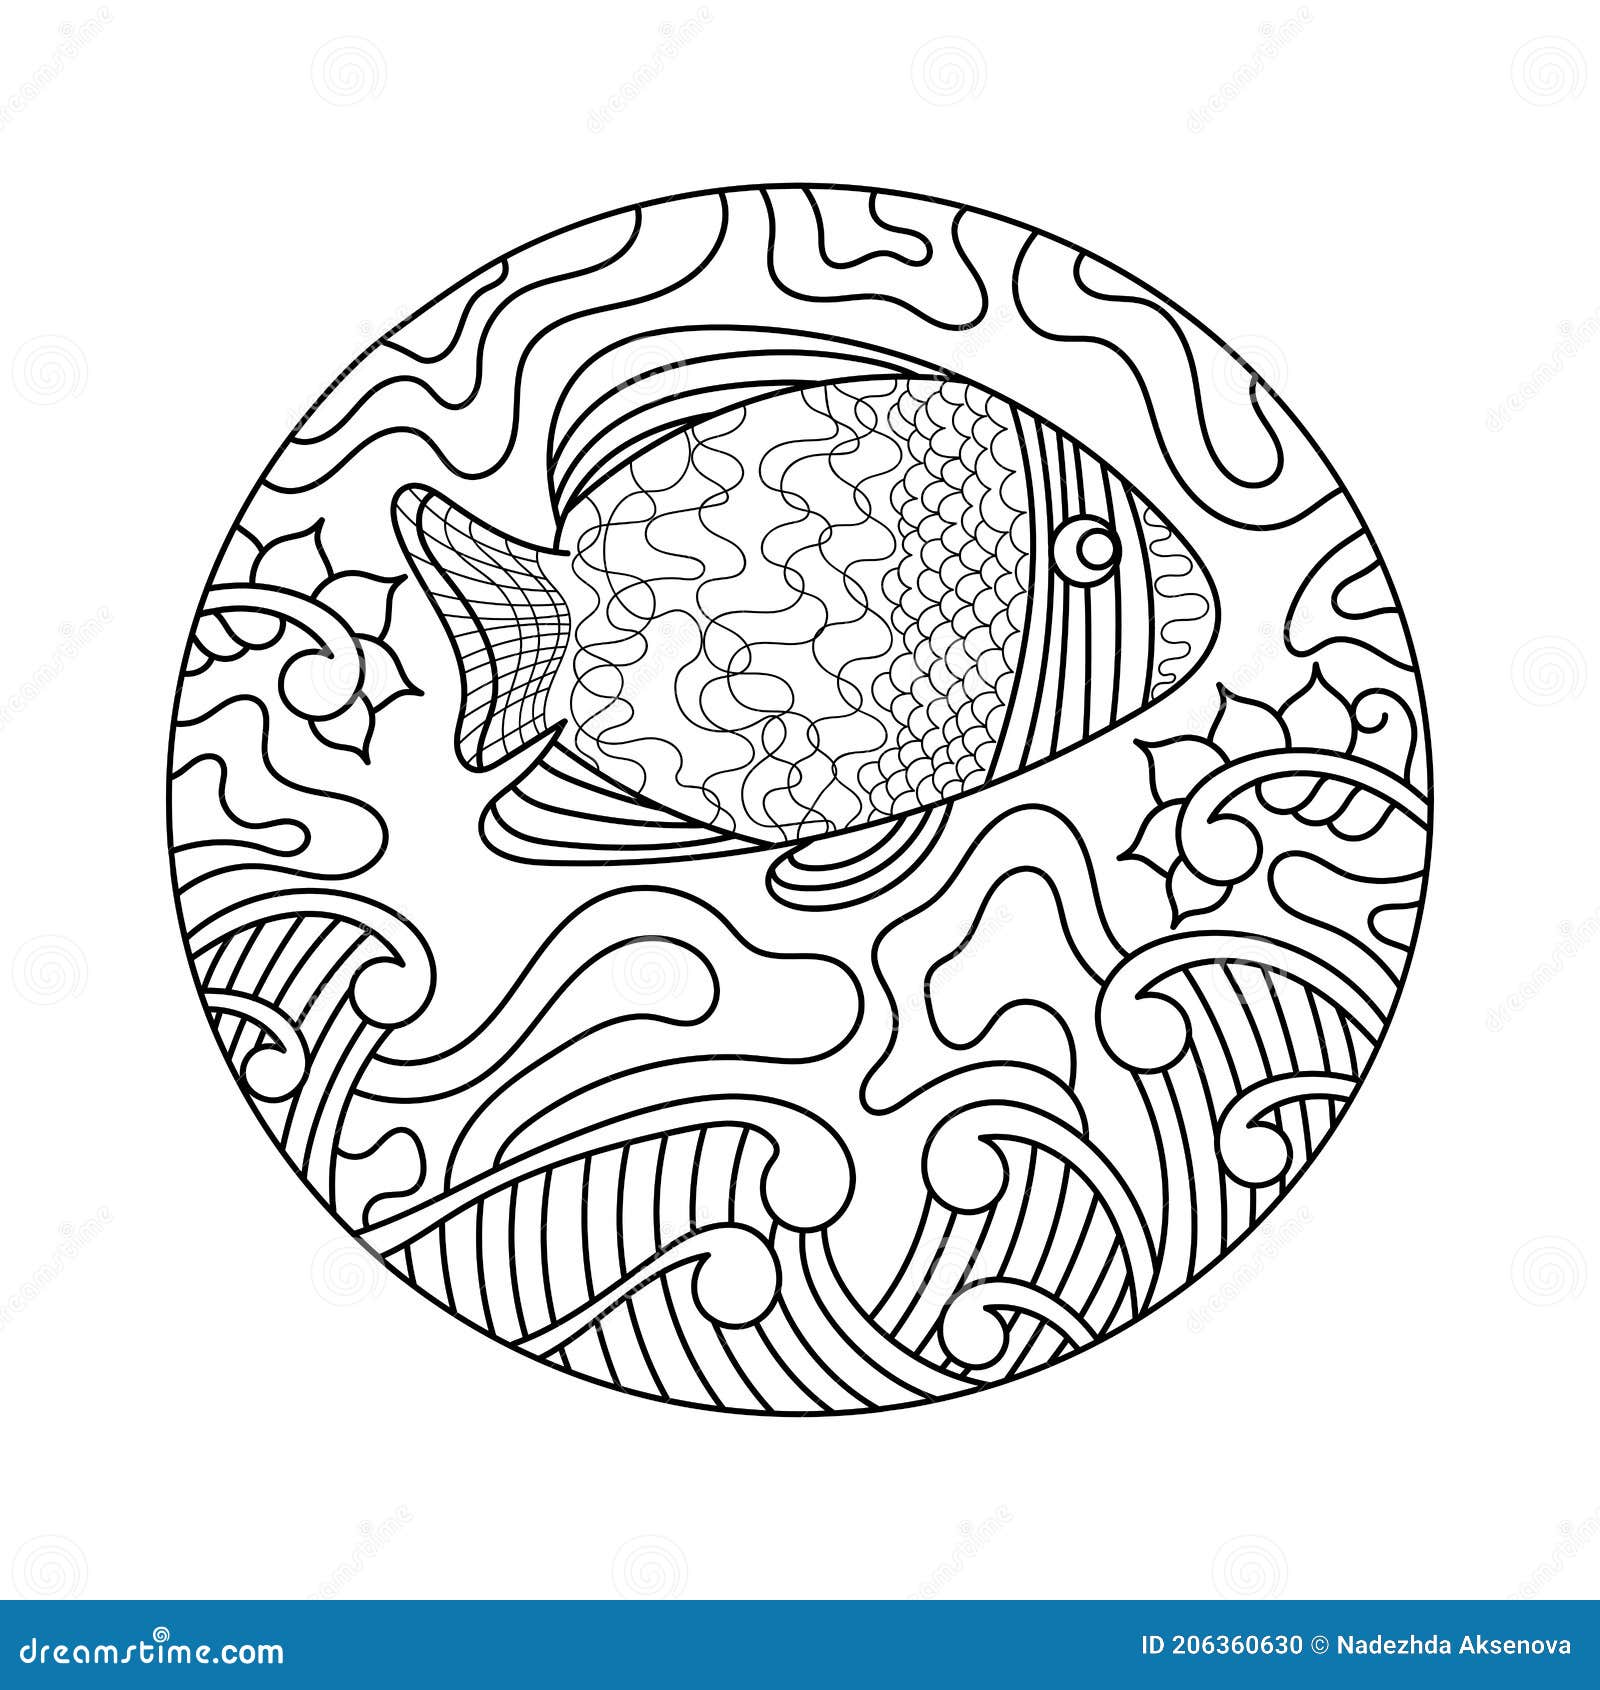 Coloring Book . Hand-drawn Fish, Waves and Abstract Elements Stock ...